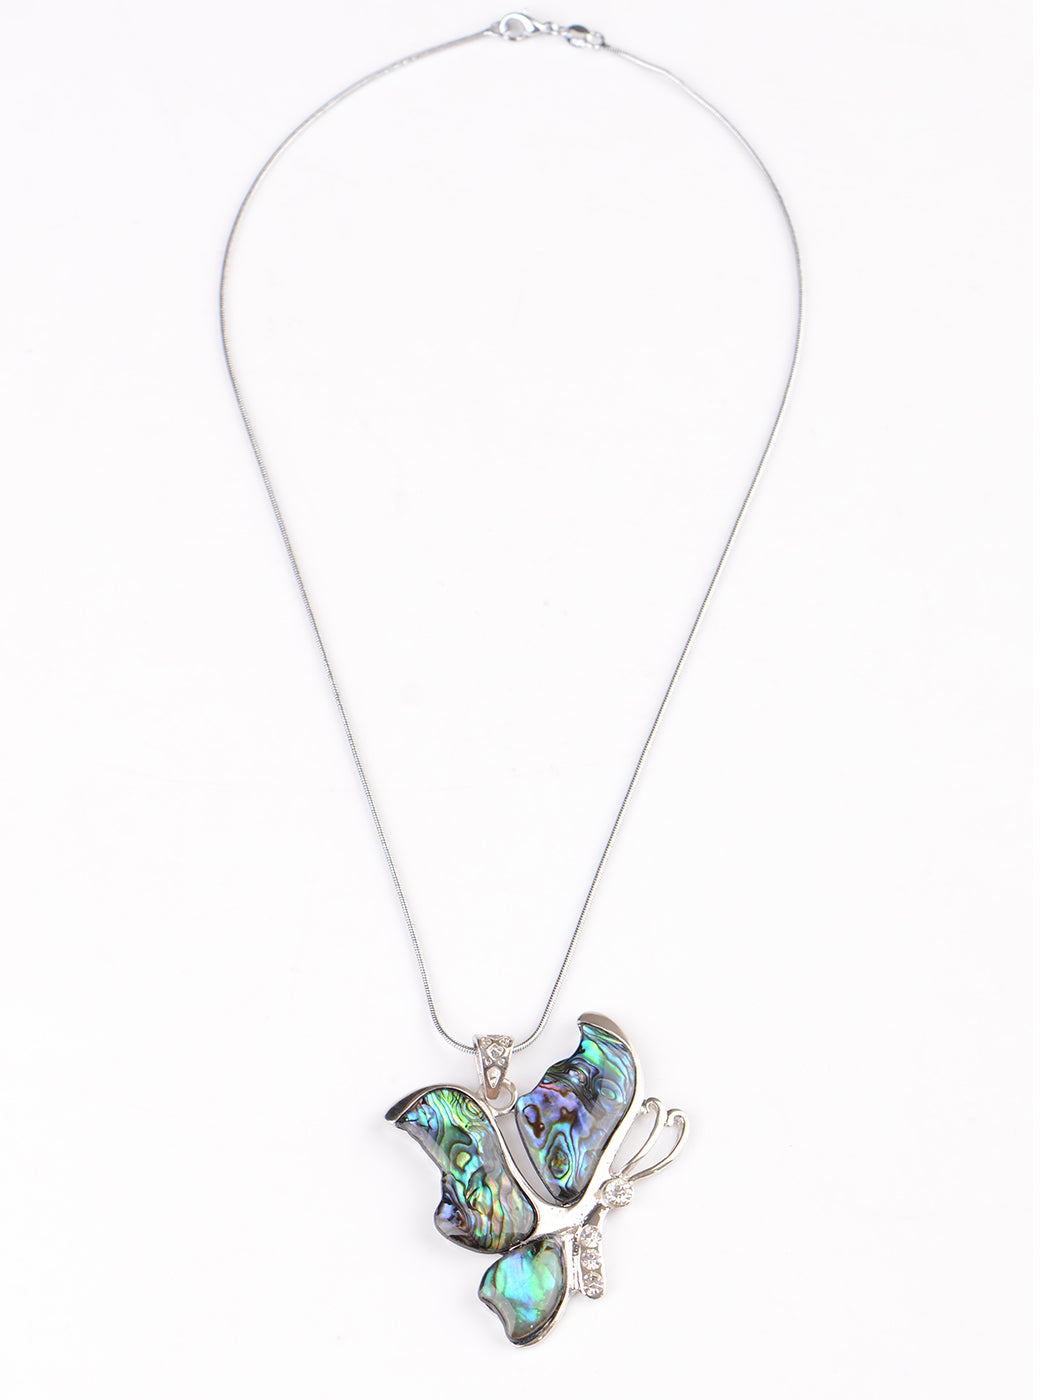 Multicolored Broken Abstract Butterfly Pendant Necklace